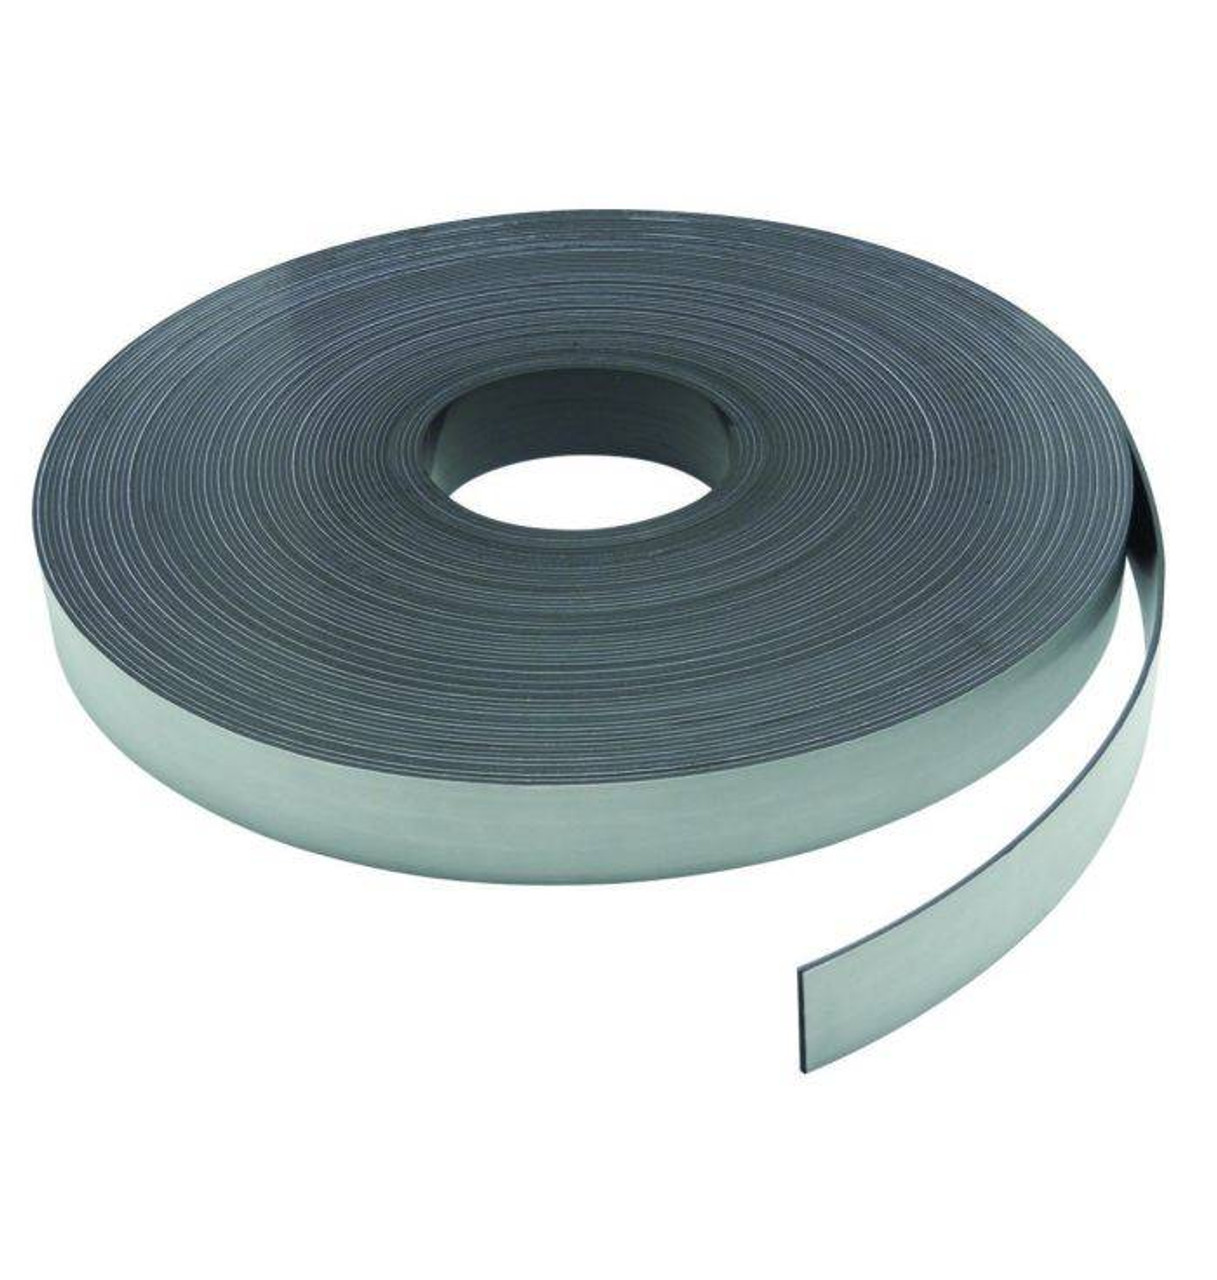 General 1 In. x 100 Ft. Magnetic Strip 369-100